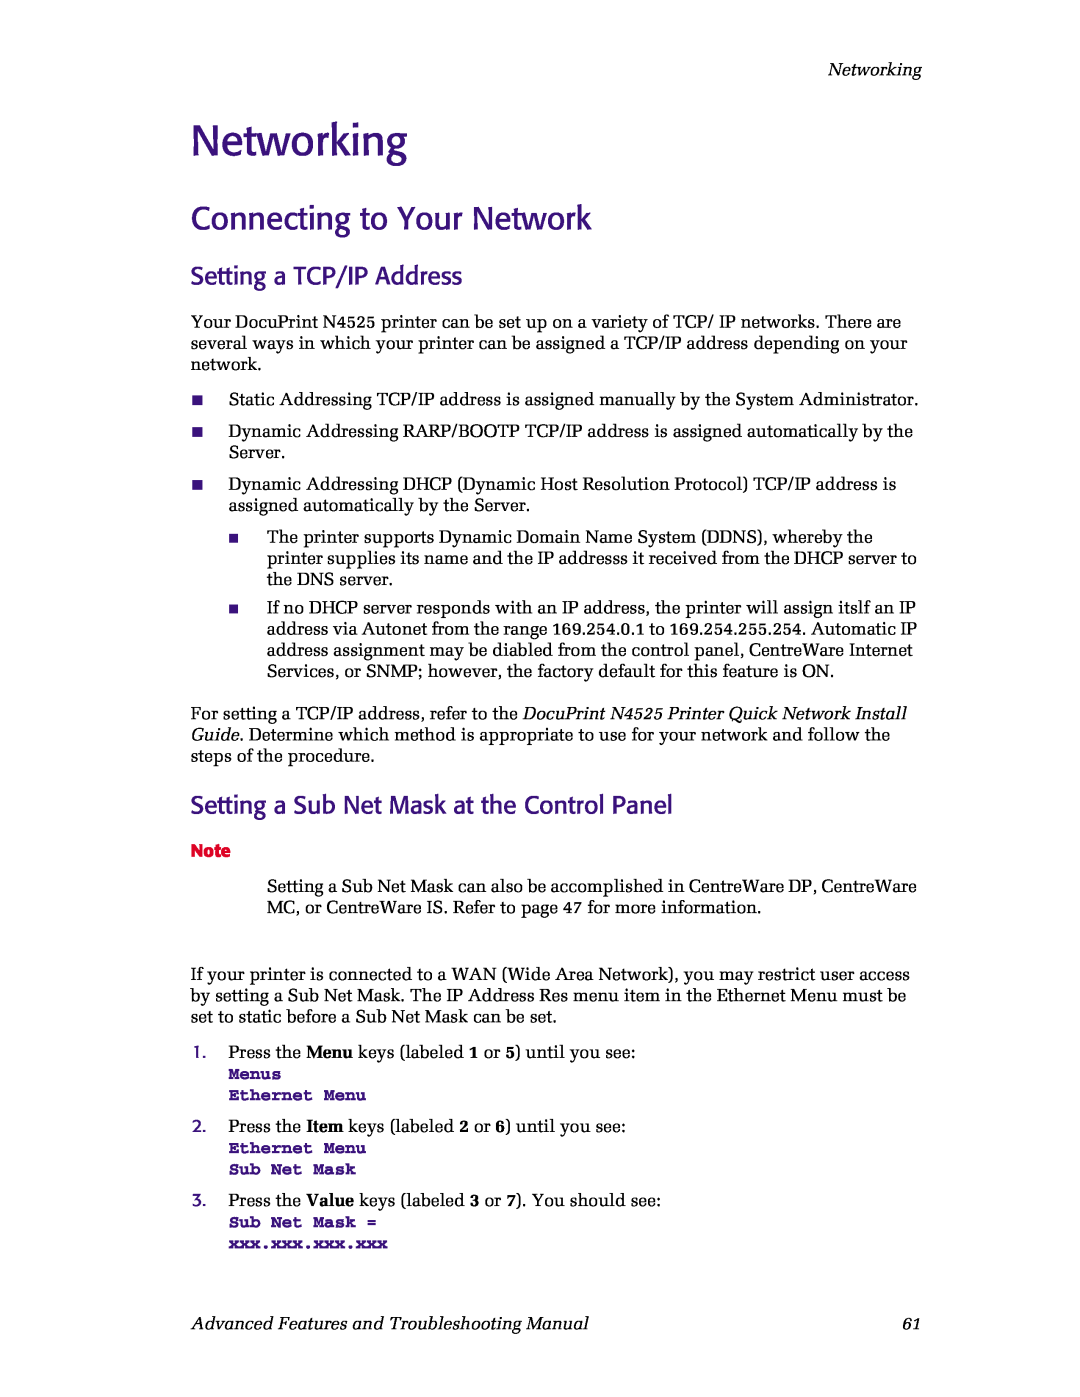 Xerox N4525 Networking, Connecting to Your Network, Setting a TCP/IP Address, Setting a Sub Net Mask at the Control Panel 